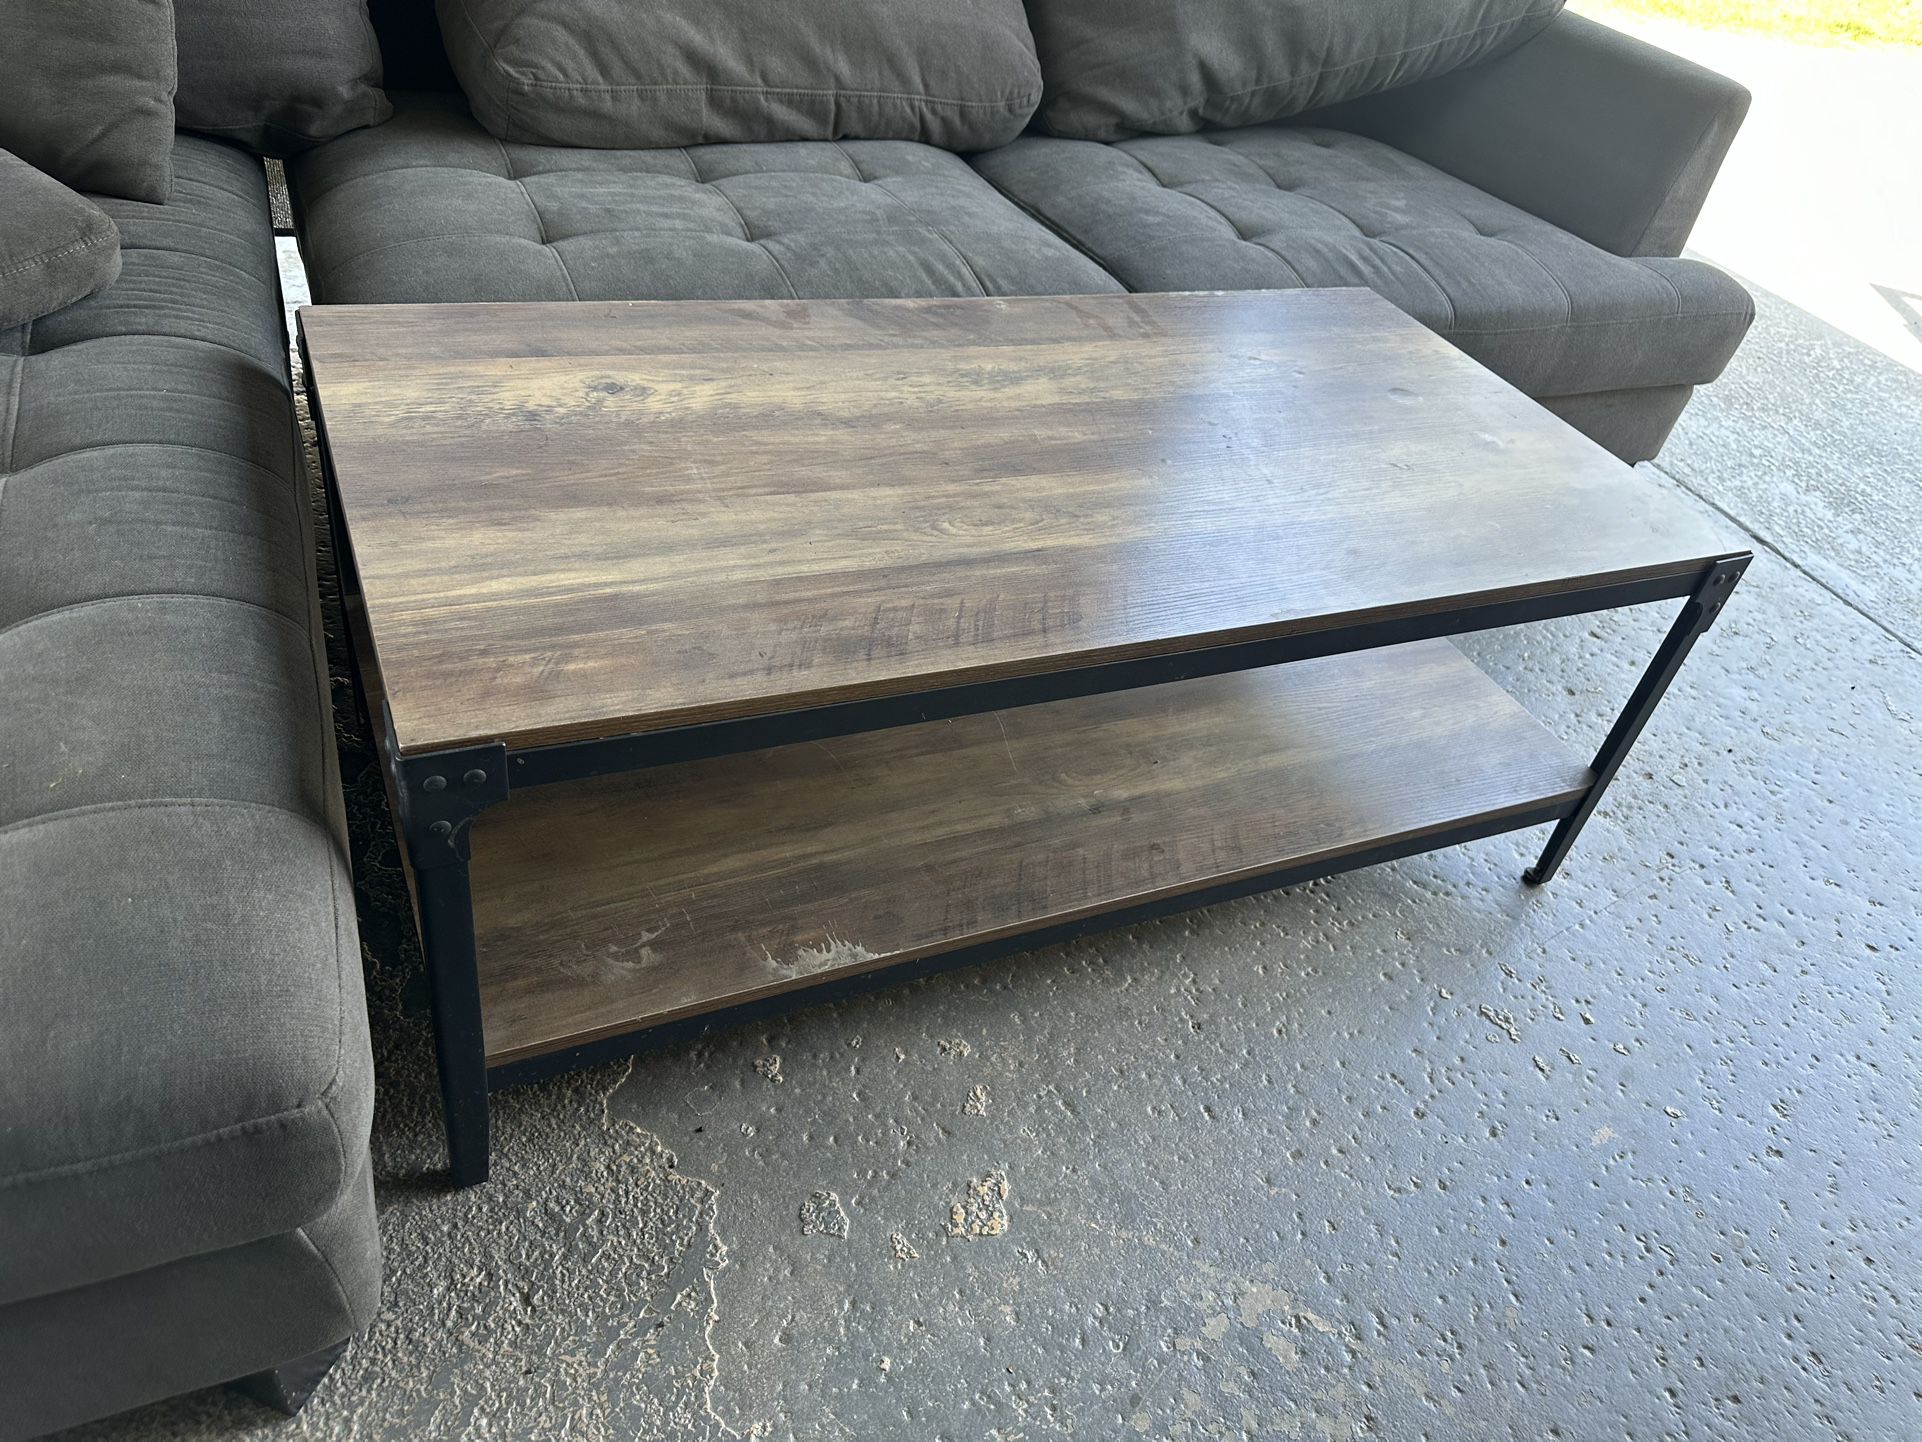 Coffee Table And Matching End Tables (2)